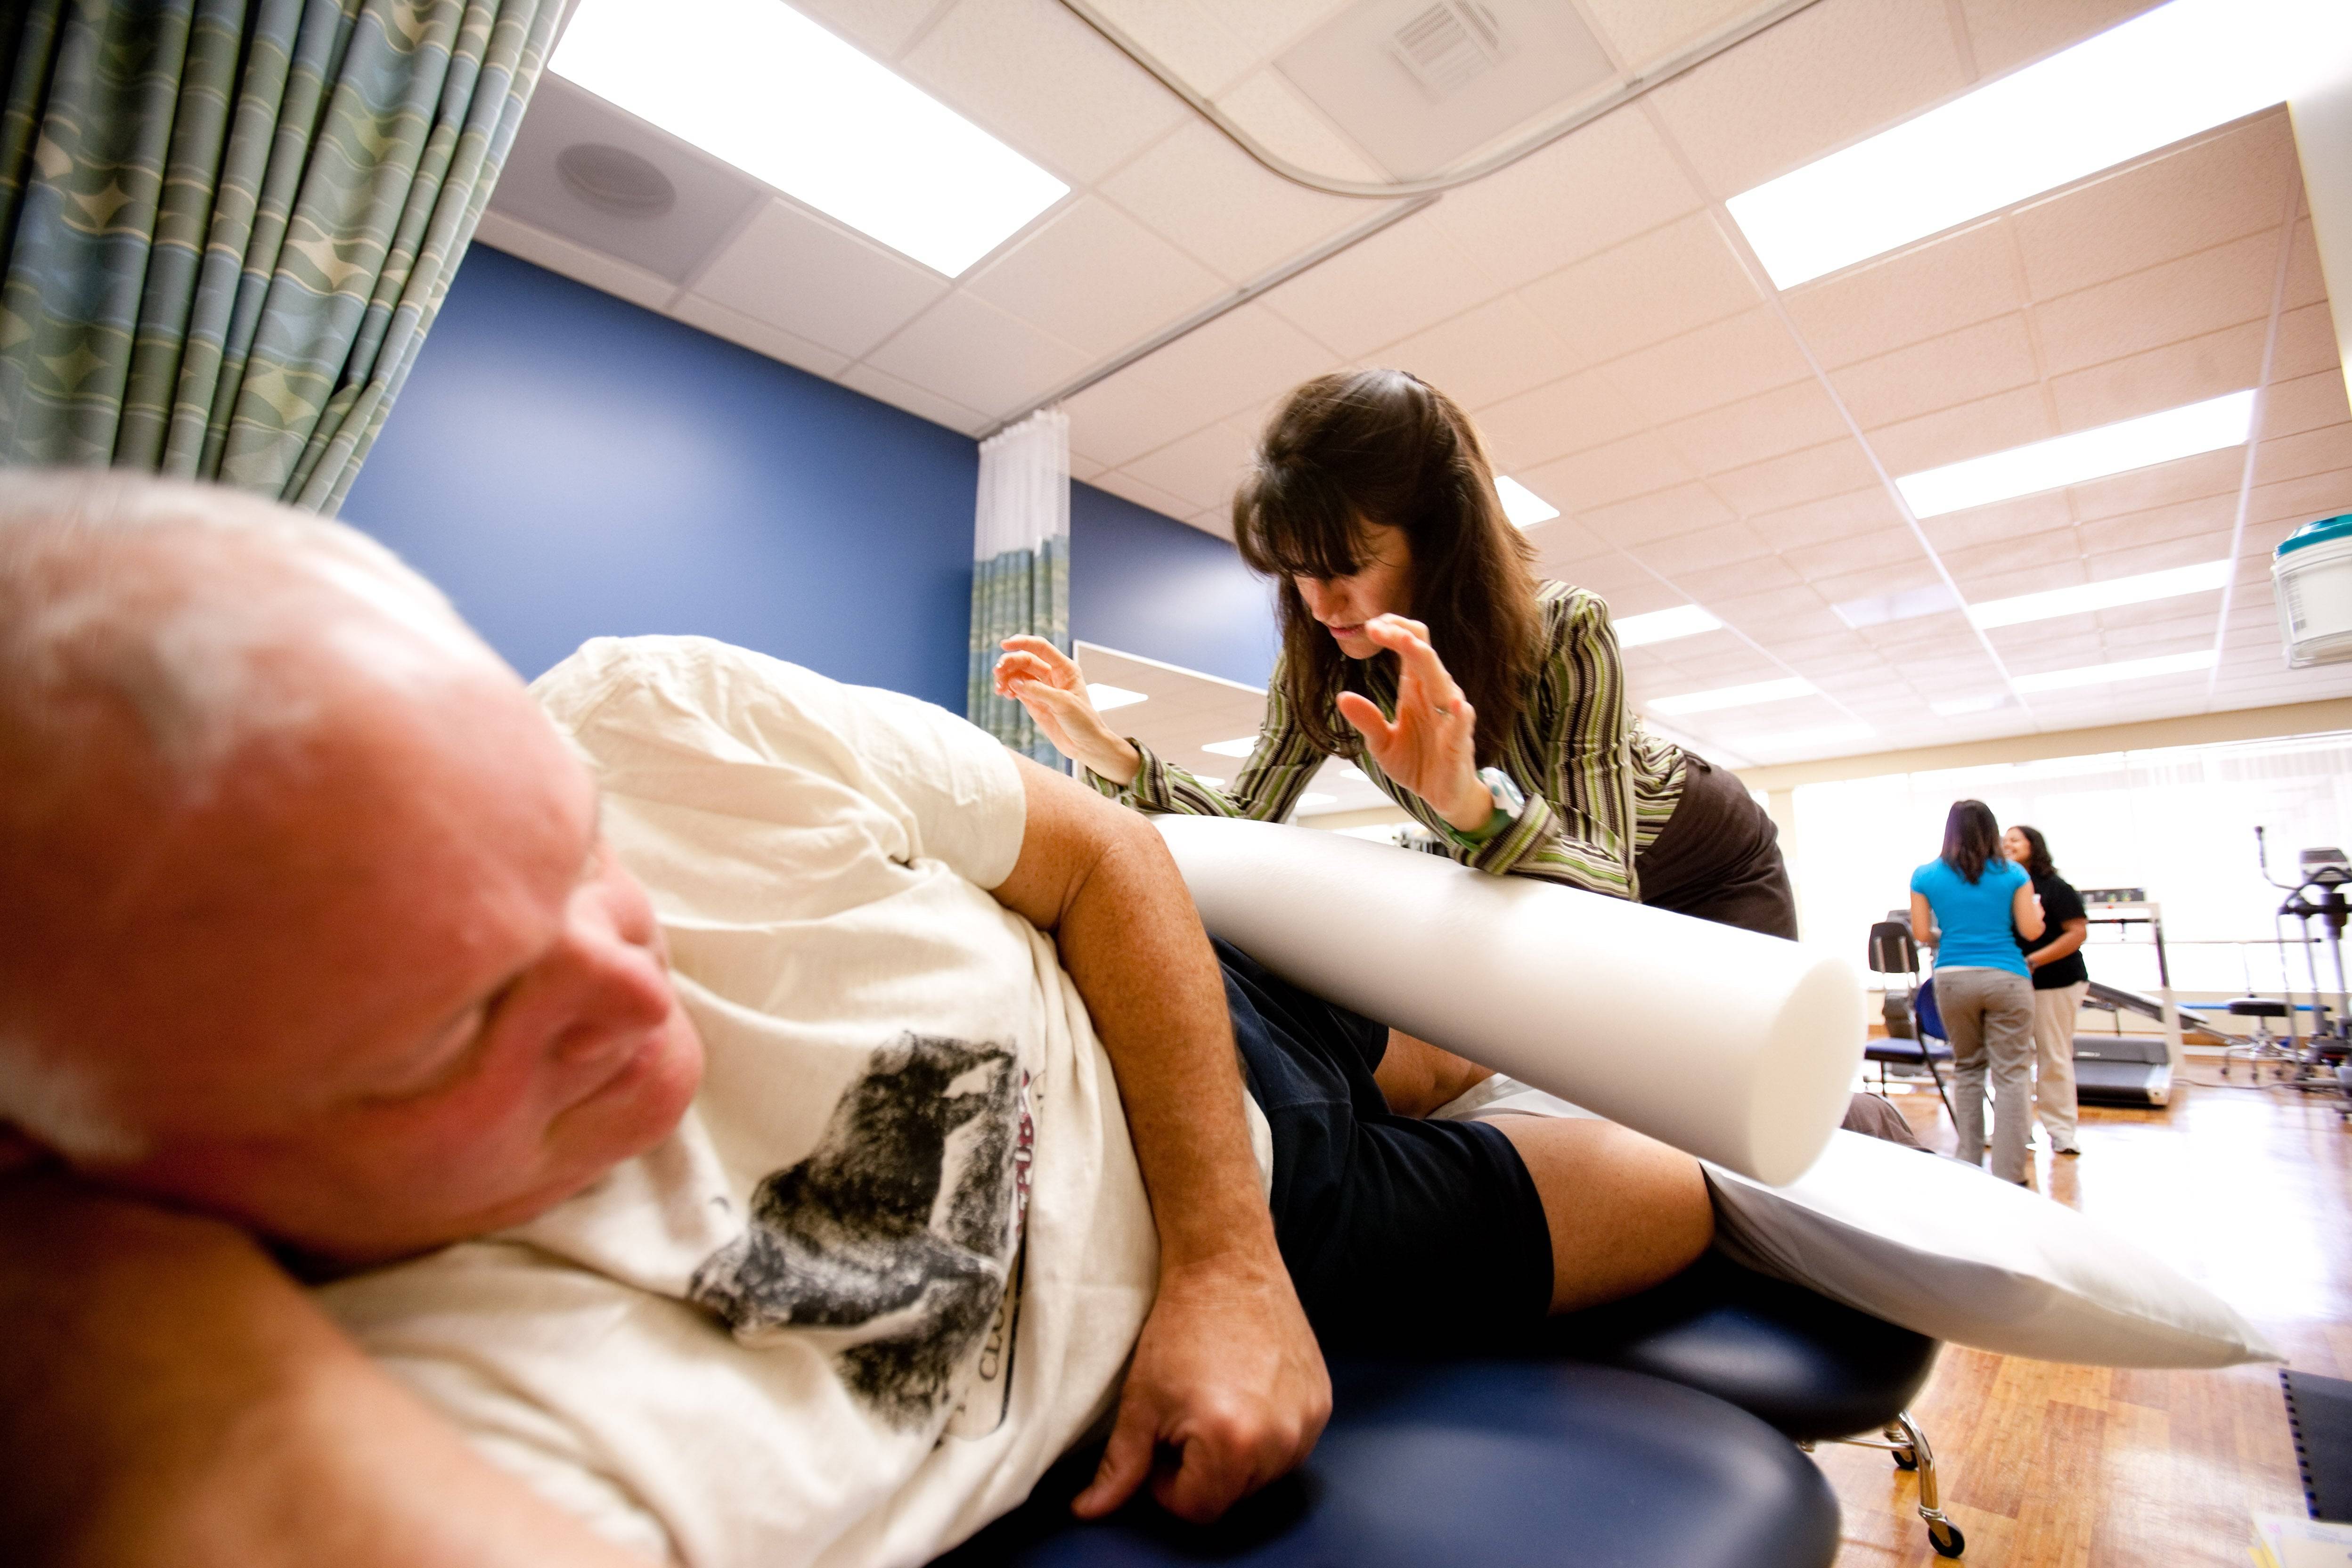 A Scripps physical therapy expert provides care to a reclining patient using a foam roller in a clinical setting.